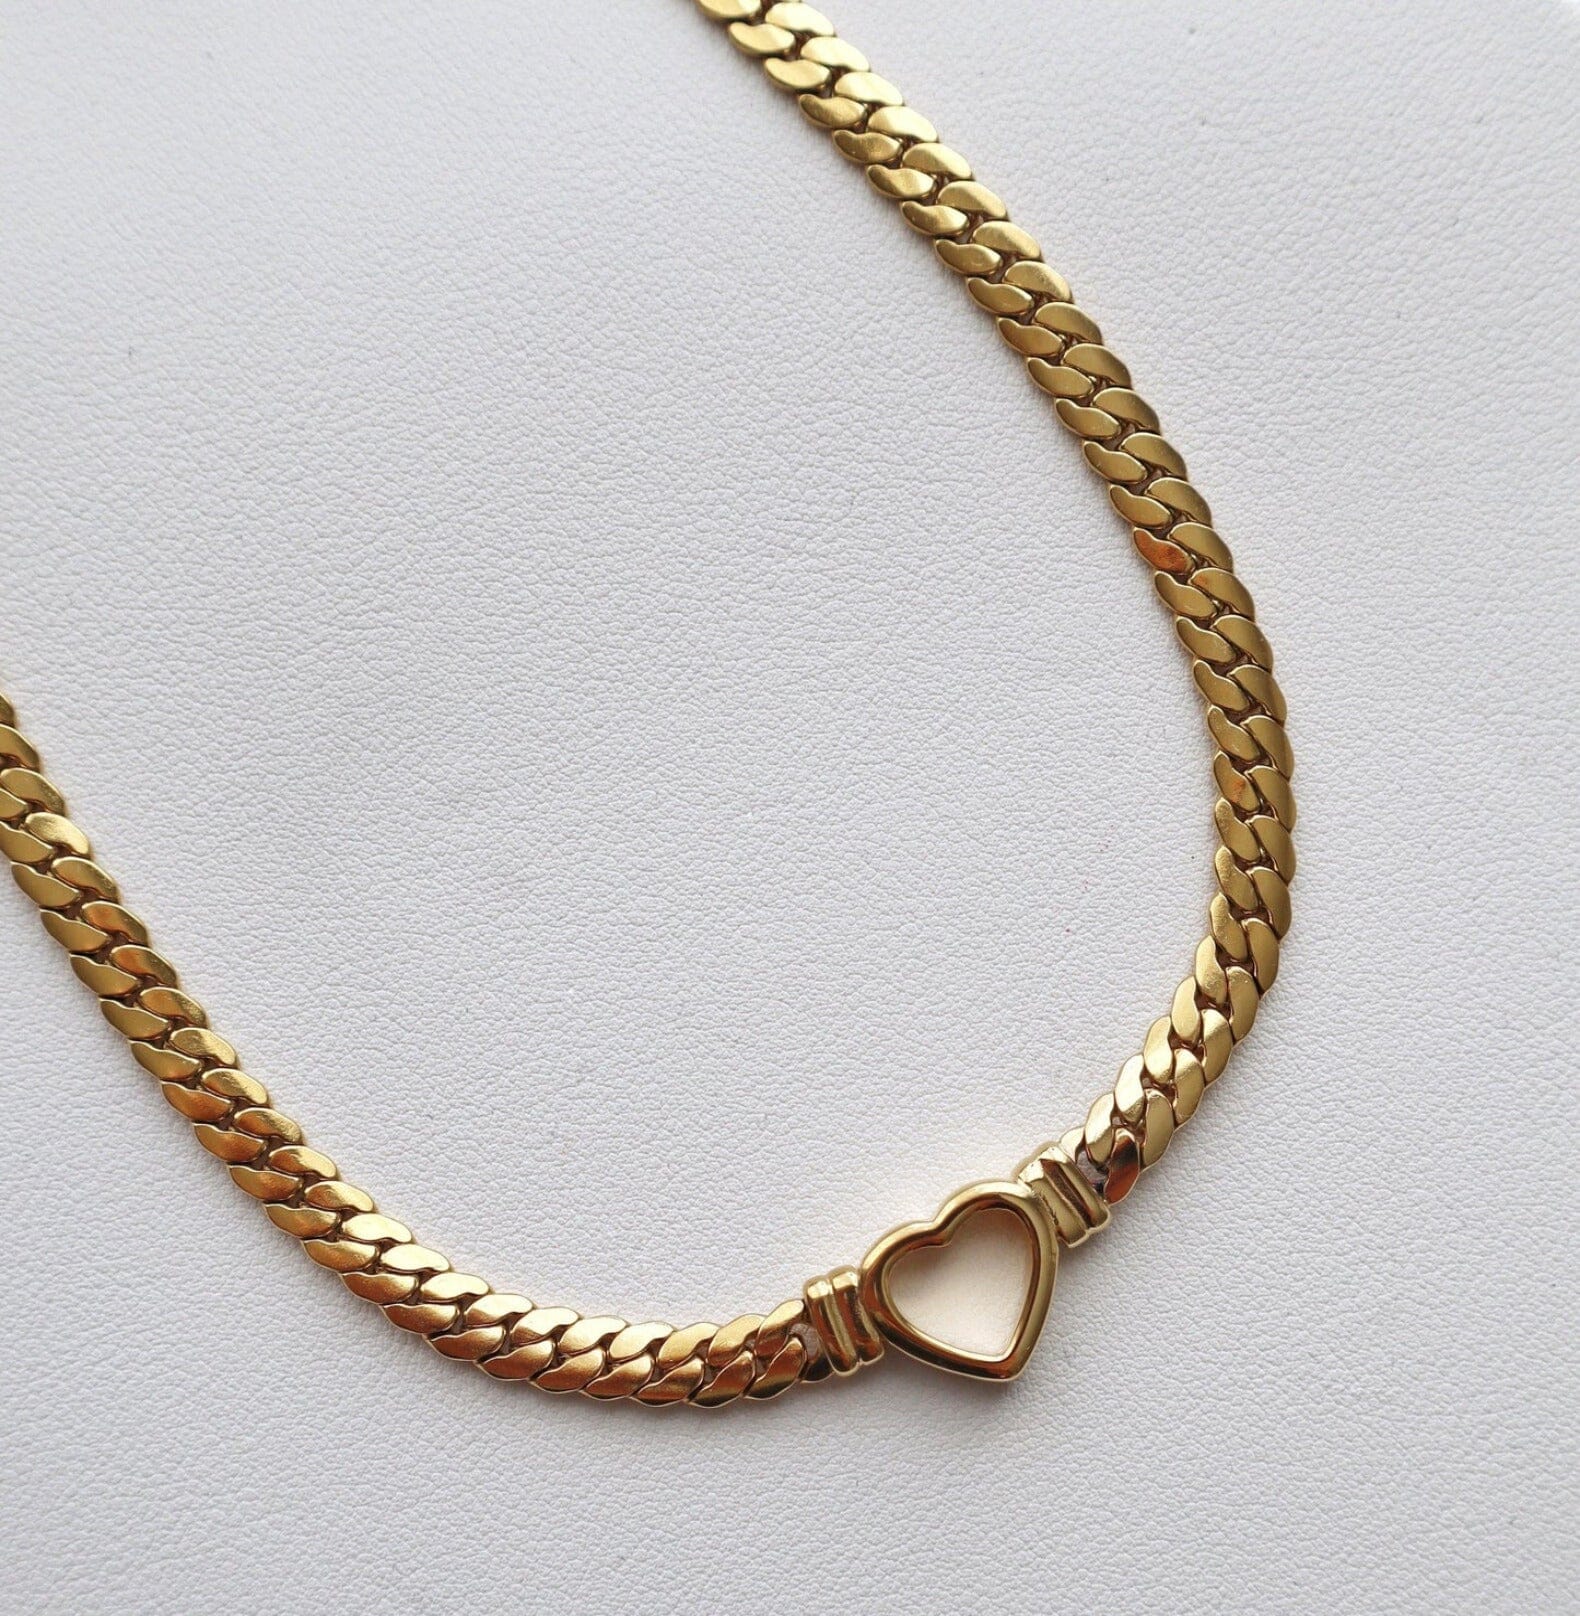 HEART CHOKER NECKLACE neck Yubama Jewelry Online Store - The Elegant Designs of Gold and Silver ! 